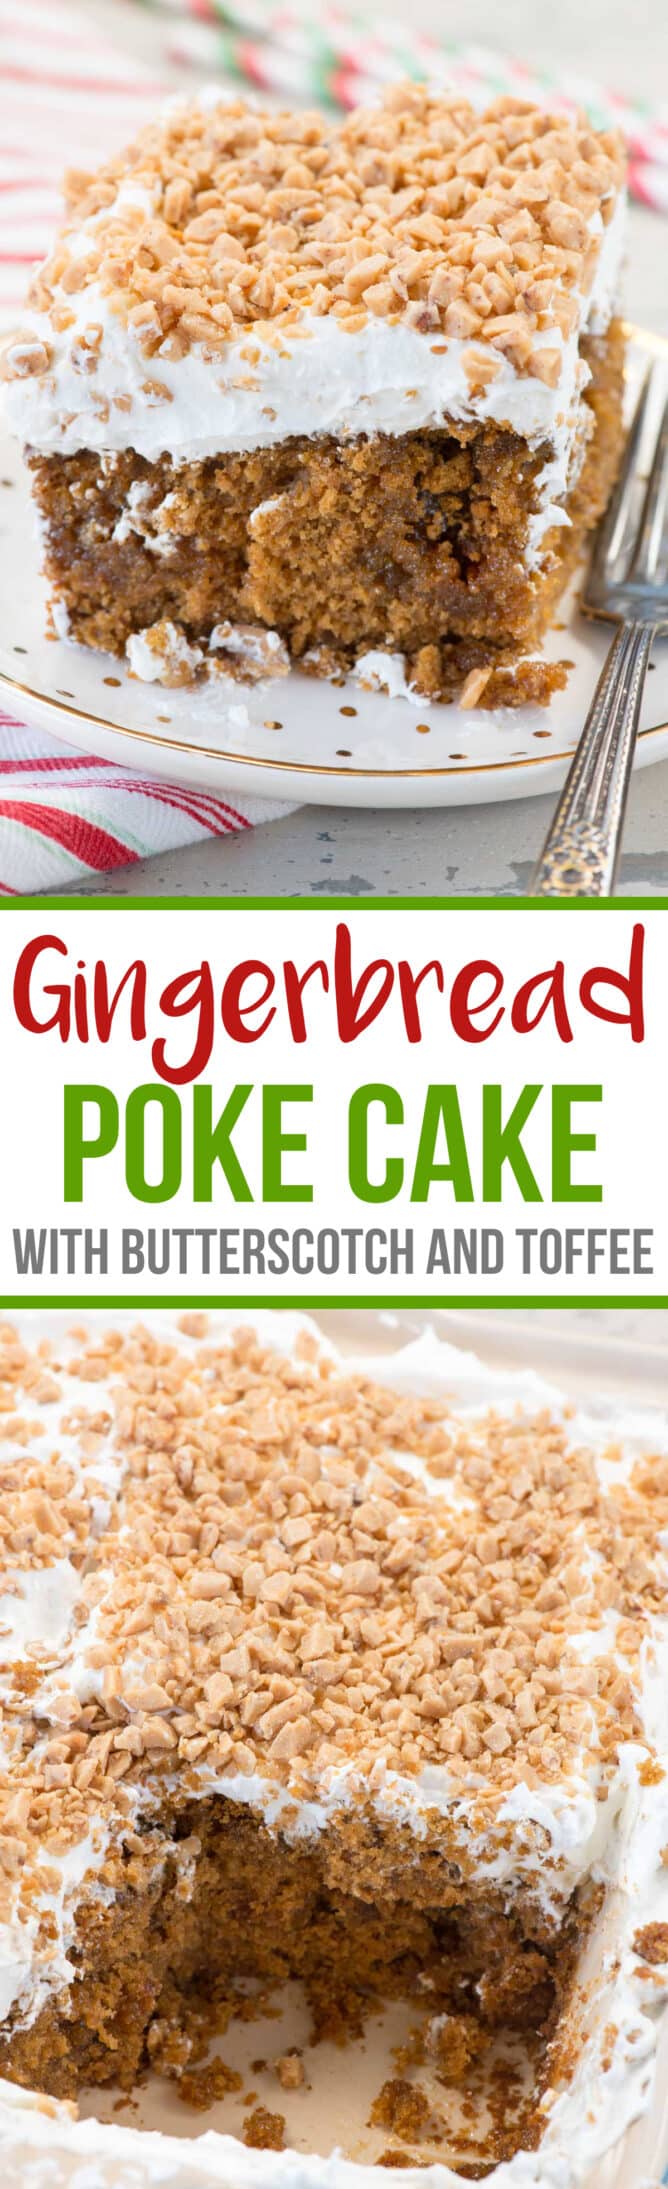 A Gingerbread Poke Cake is the perfect Christmas cake recipe! Gingerbread cake is filled with butterscotch and gingersnaps and topped with whipped cream and toffee bits. It's the perfect holiday dessert. Poke cakes are easy to make and super versatile, plus they're easy to travel with, so they're the perfect potluck dessert recipe. Serve this gingerbread version at your holiday party and wow your guests with Christmas flavor!